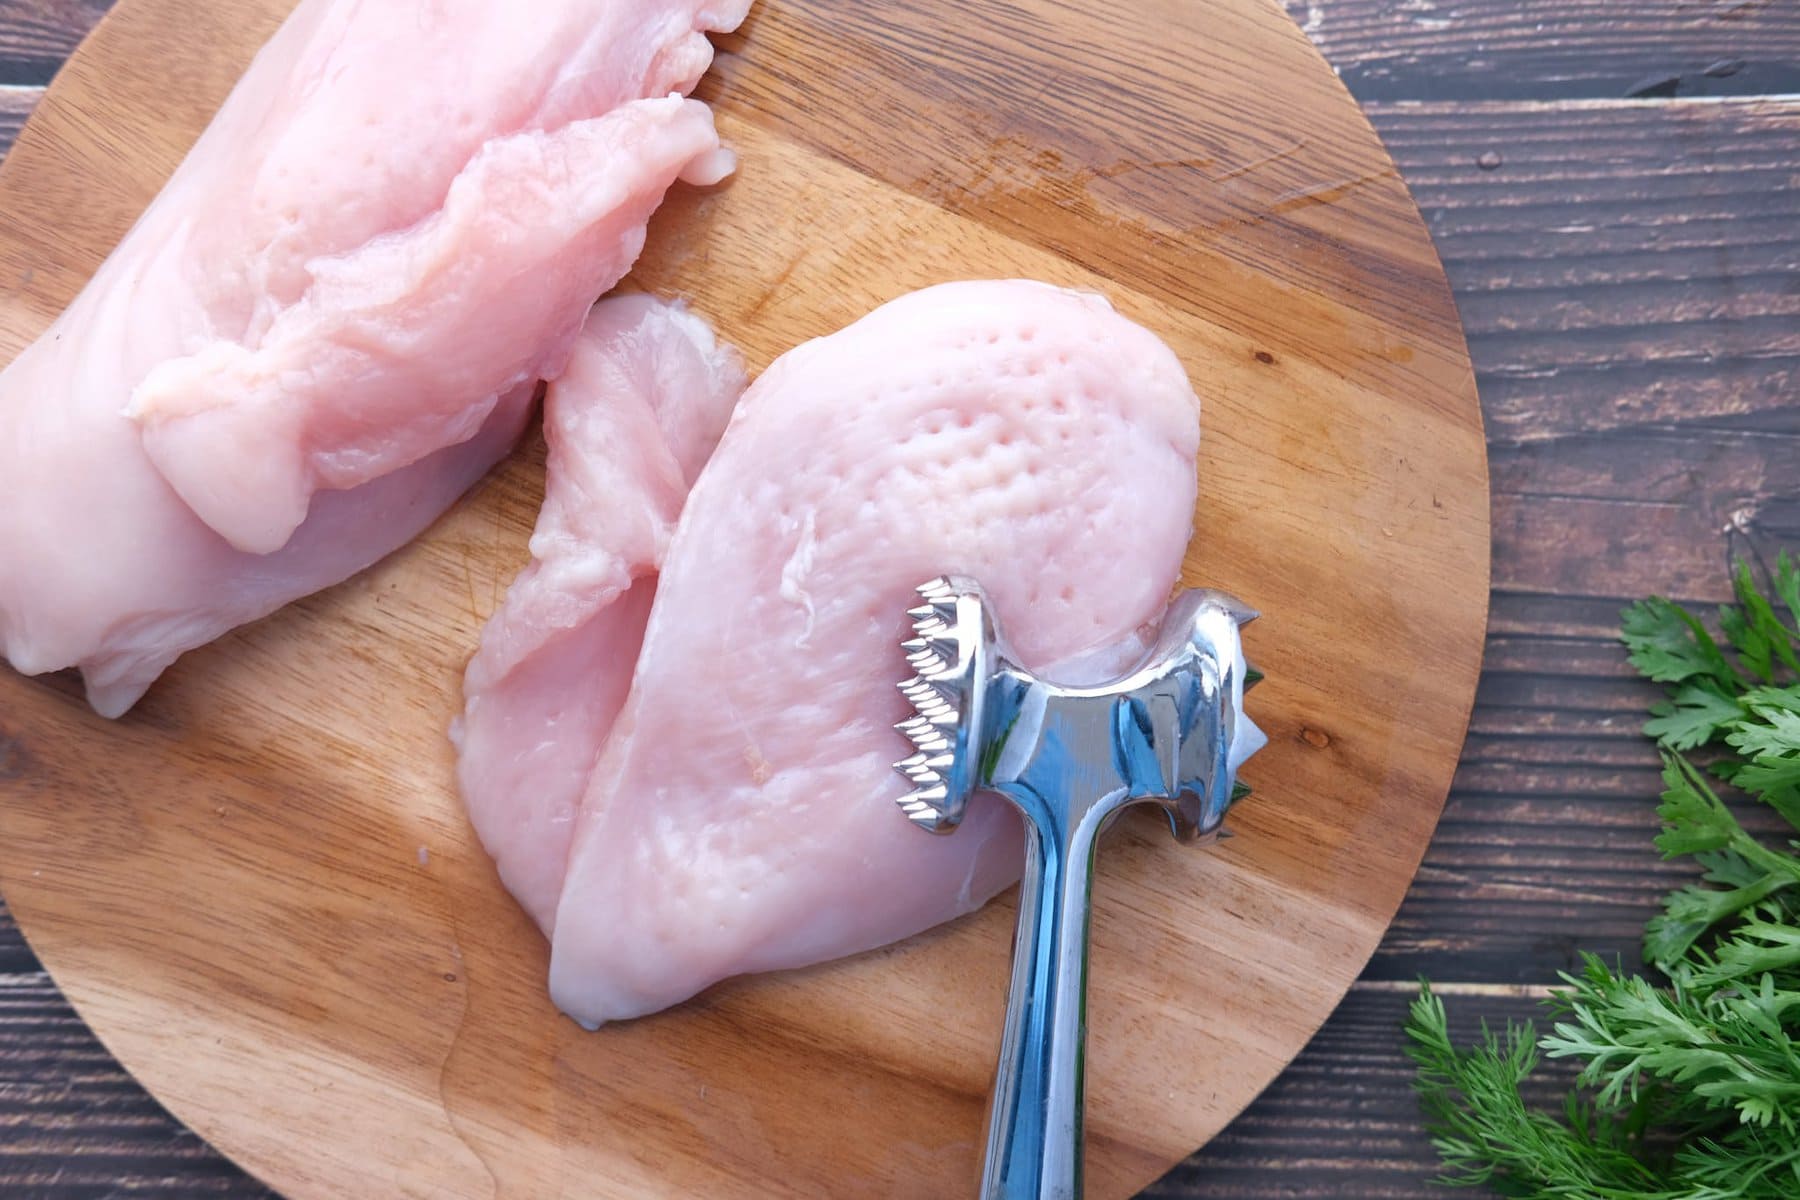 How To Tell If Raw Chicken Is Bad